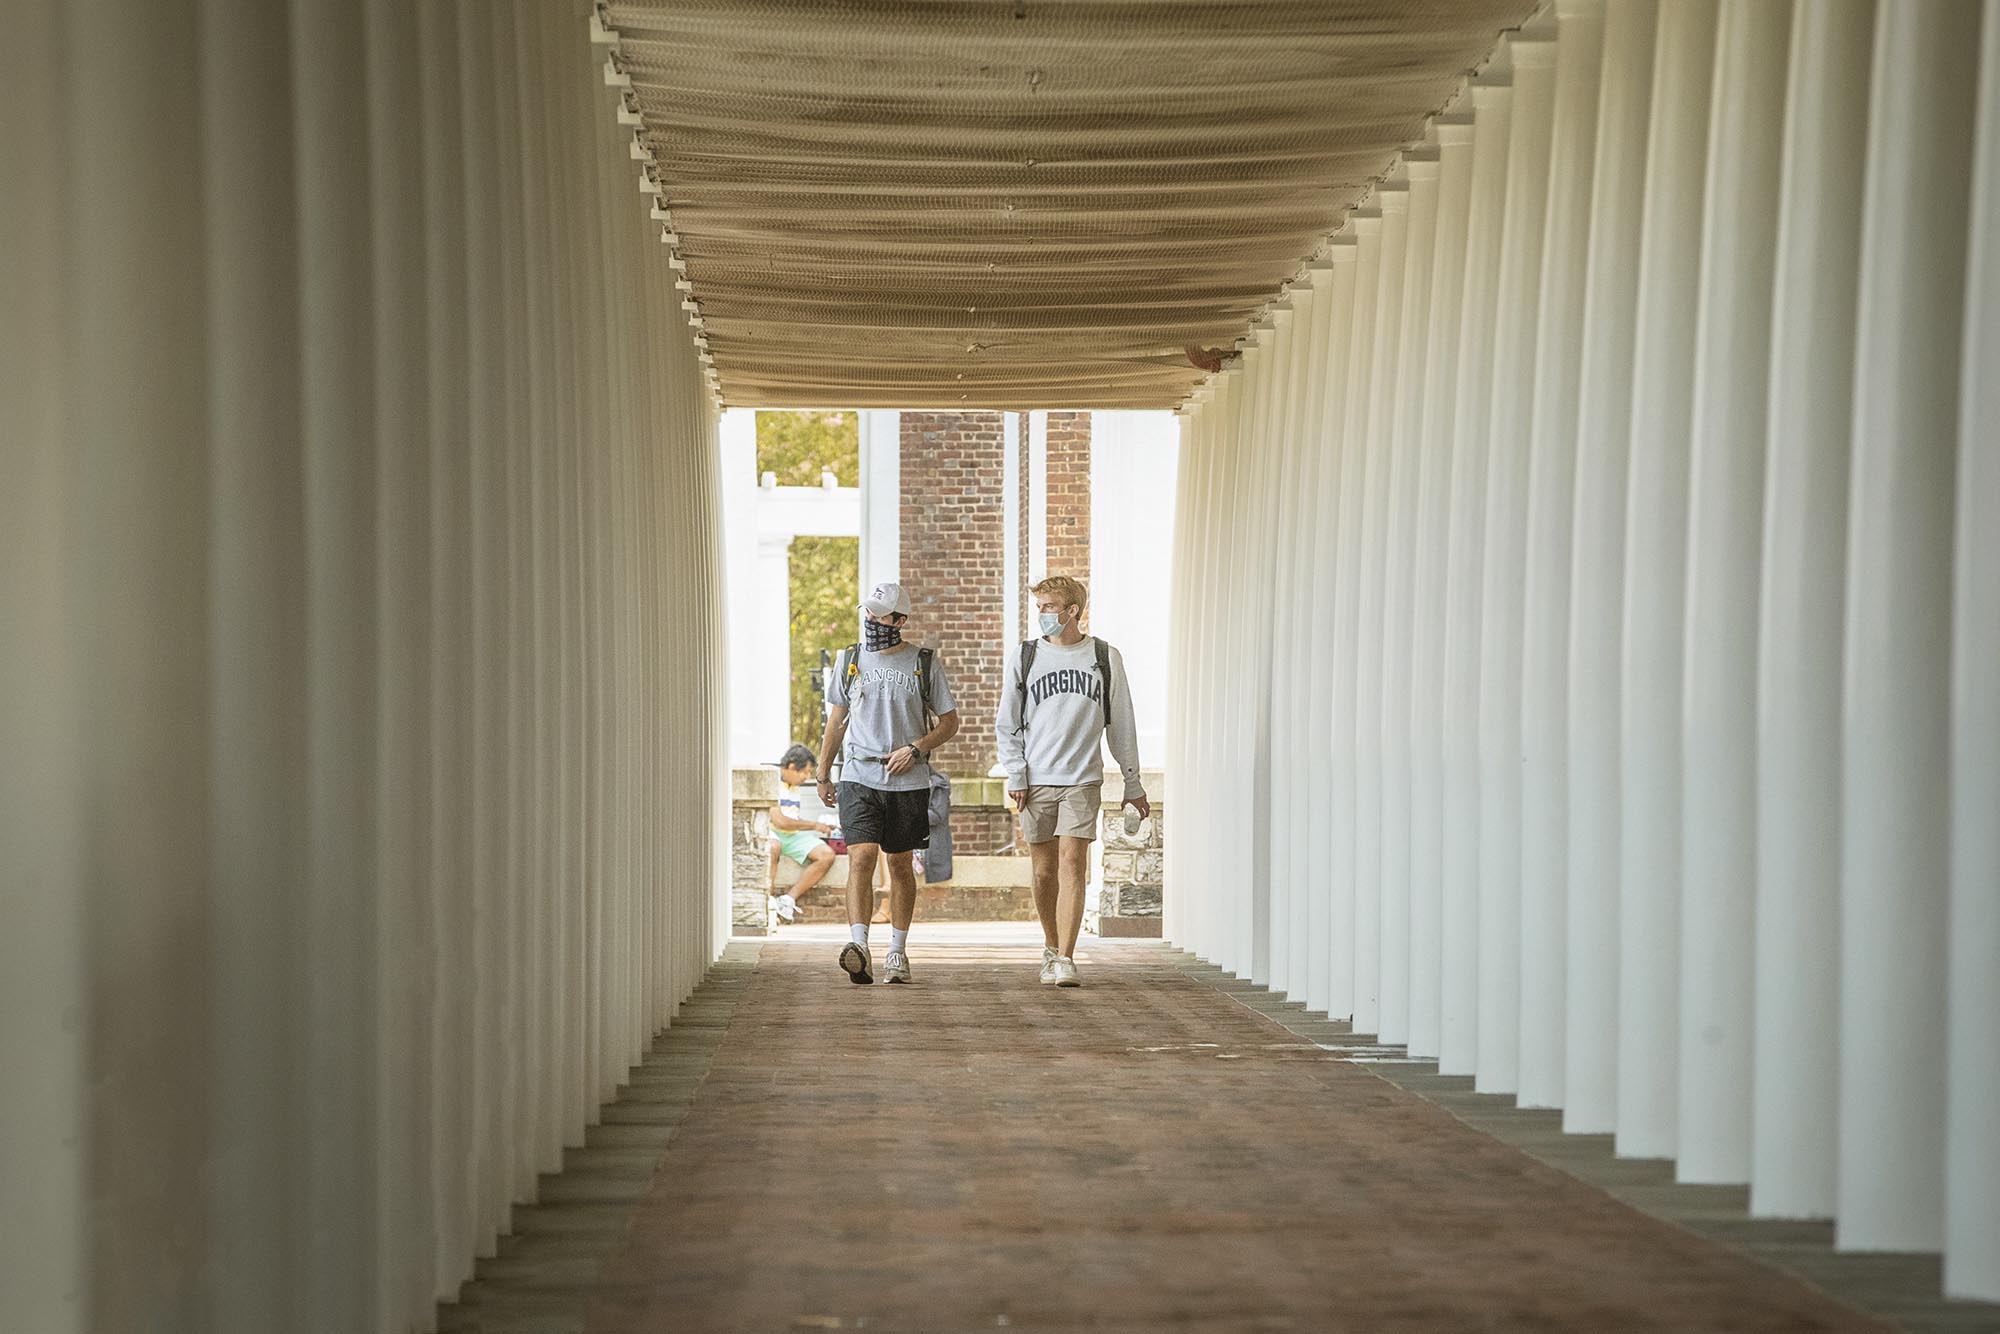 Two students walking down a covered sidewalk lined on both sides with white columns